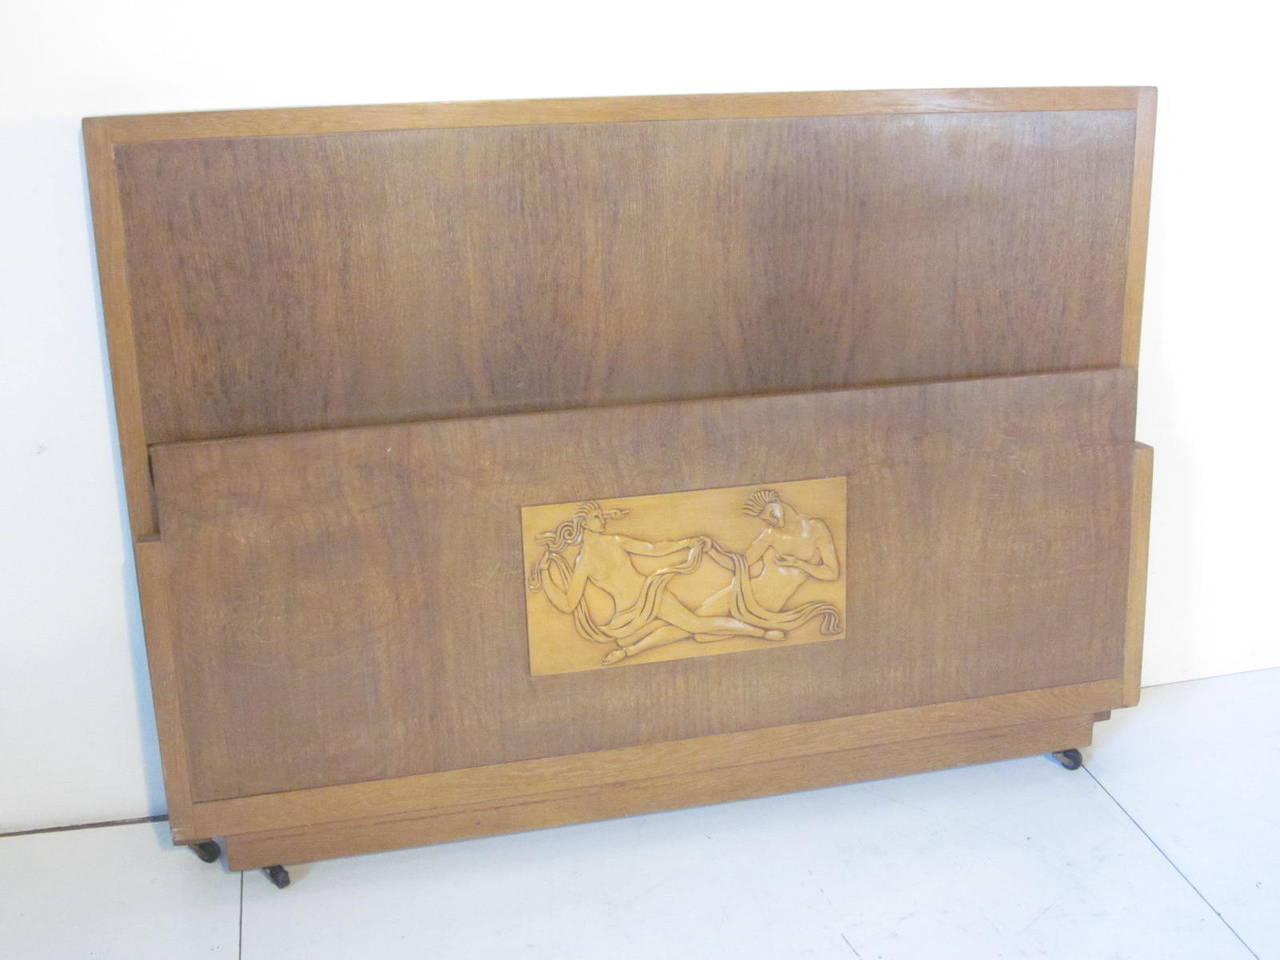 An Art Deco bed with relief to the foot board of a dream like man and woman motif set in well grained wood with matching headboard. This bed comes complete with matching wood side rails and bottom slats, will accommodate a standard full size